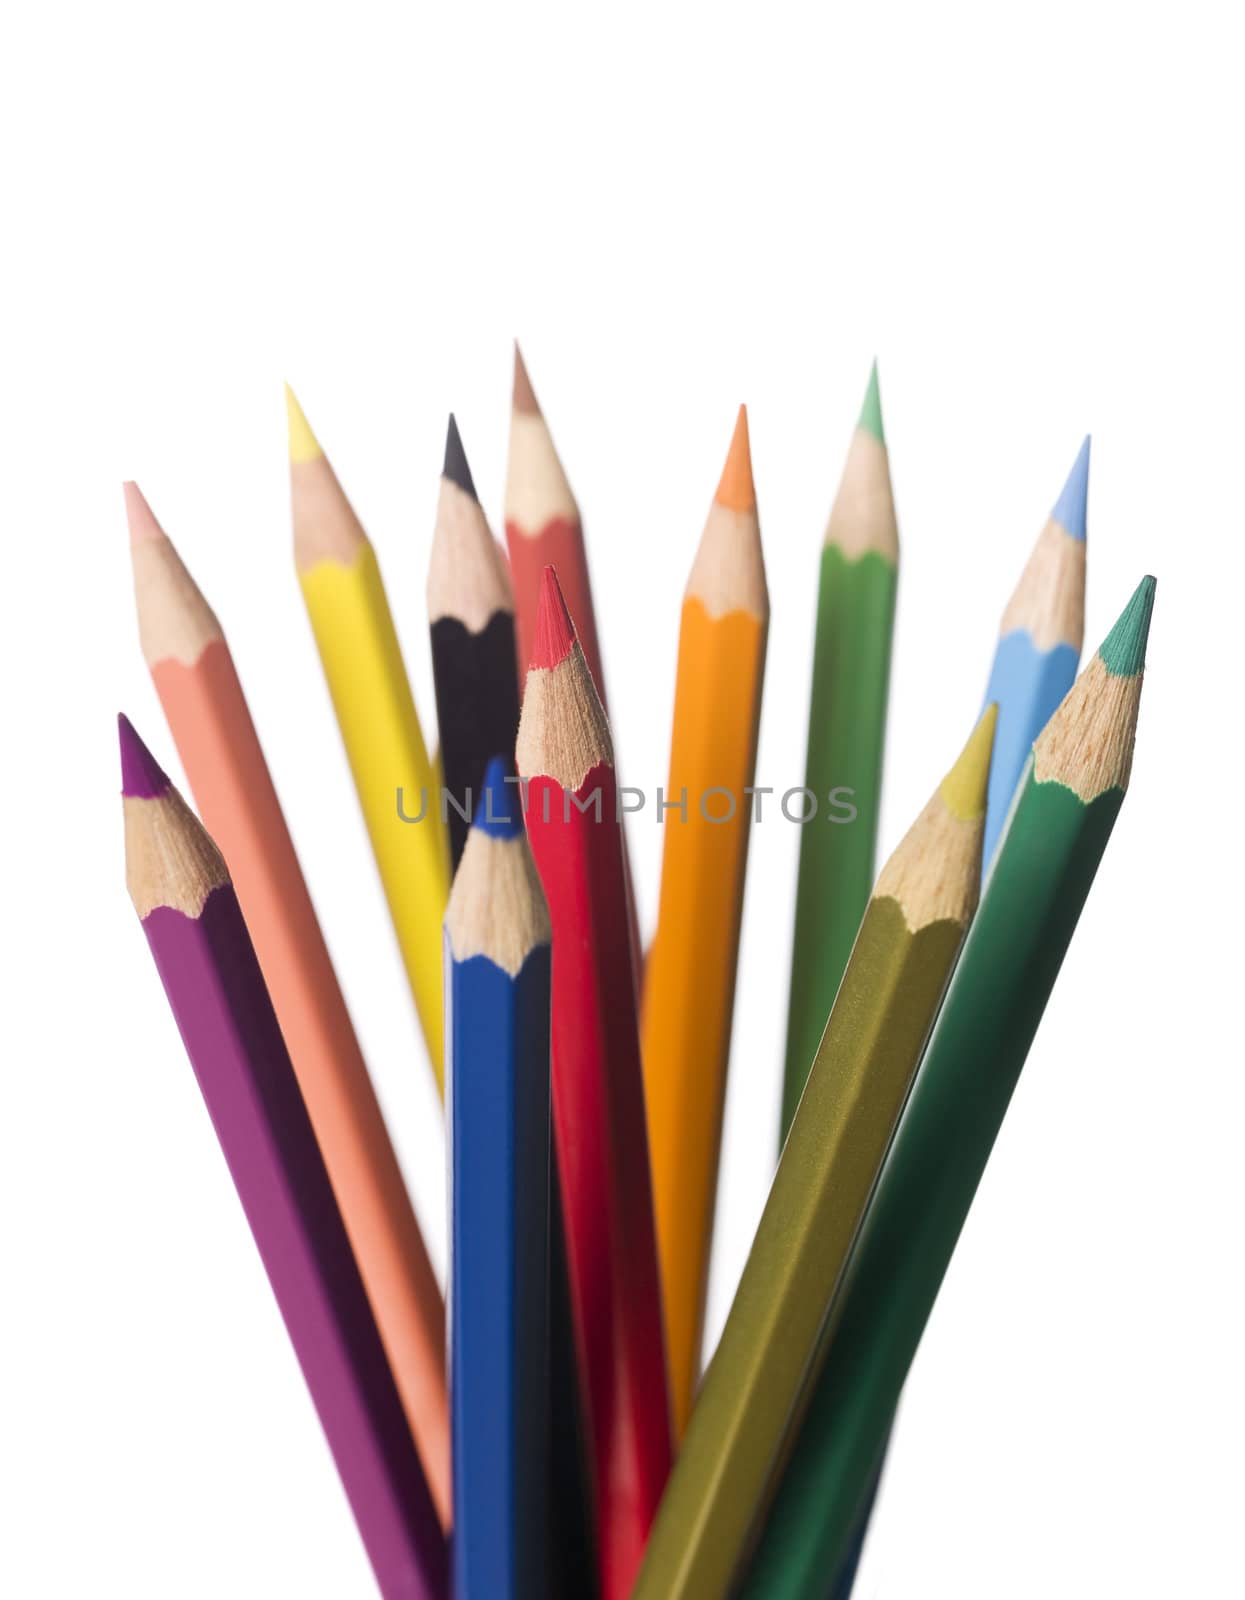 Bunch of colourd pencils